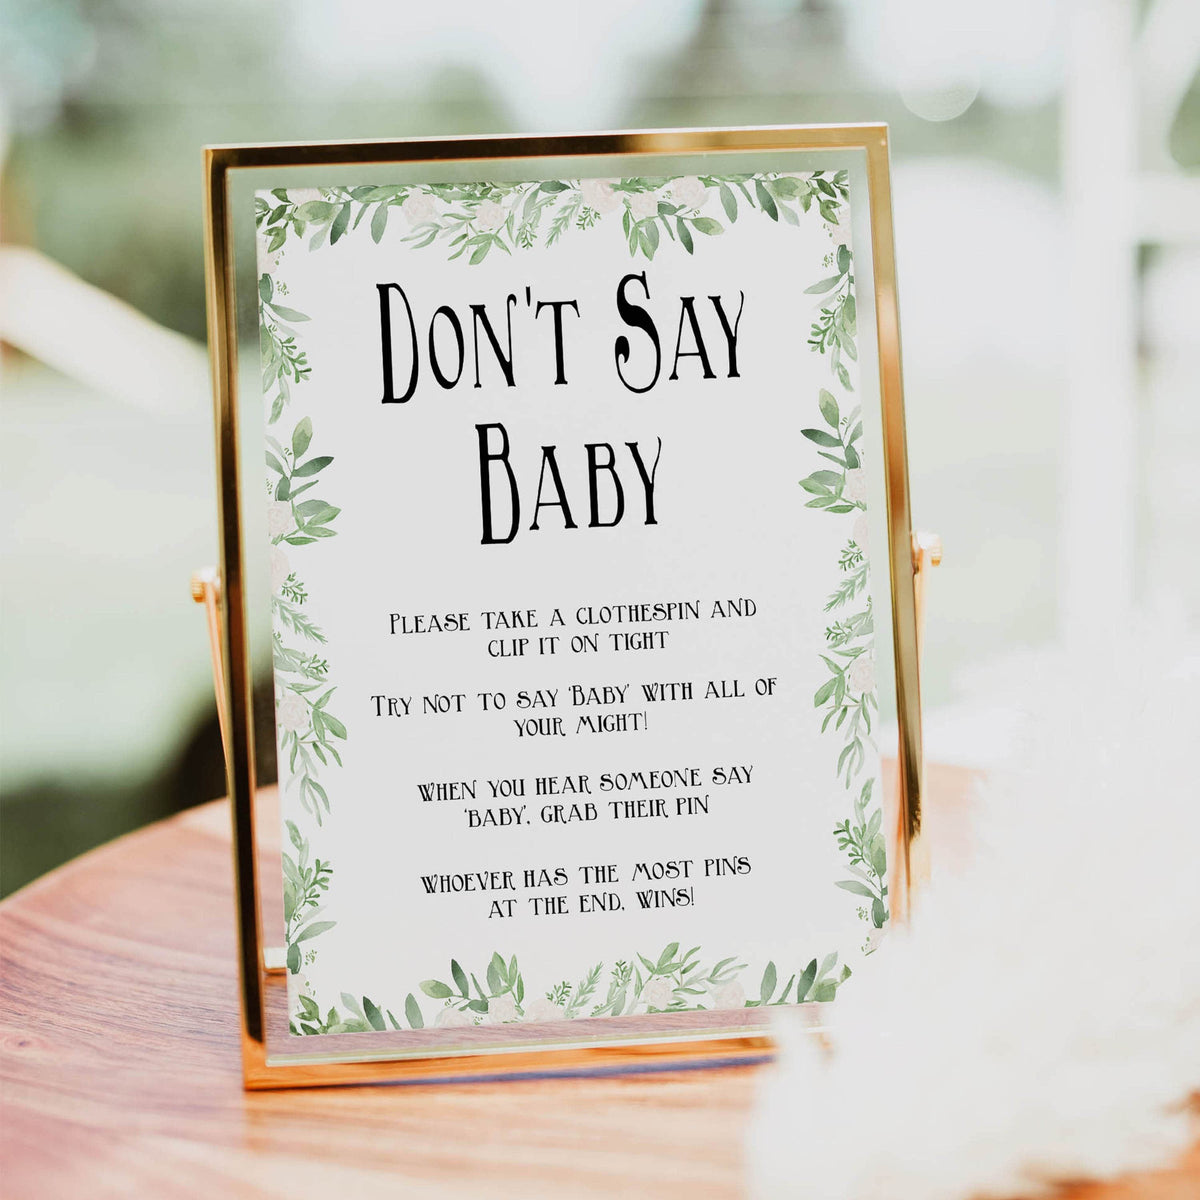 Green Leaf Don't Say Baby, Don't Say Baby Sign, Greenery Don't Say Baby Game, Green Baby Shower Games, Dont Say Game, Green Baby Shower, printable baby shower games, fun baby shower games, popular baby shower games